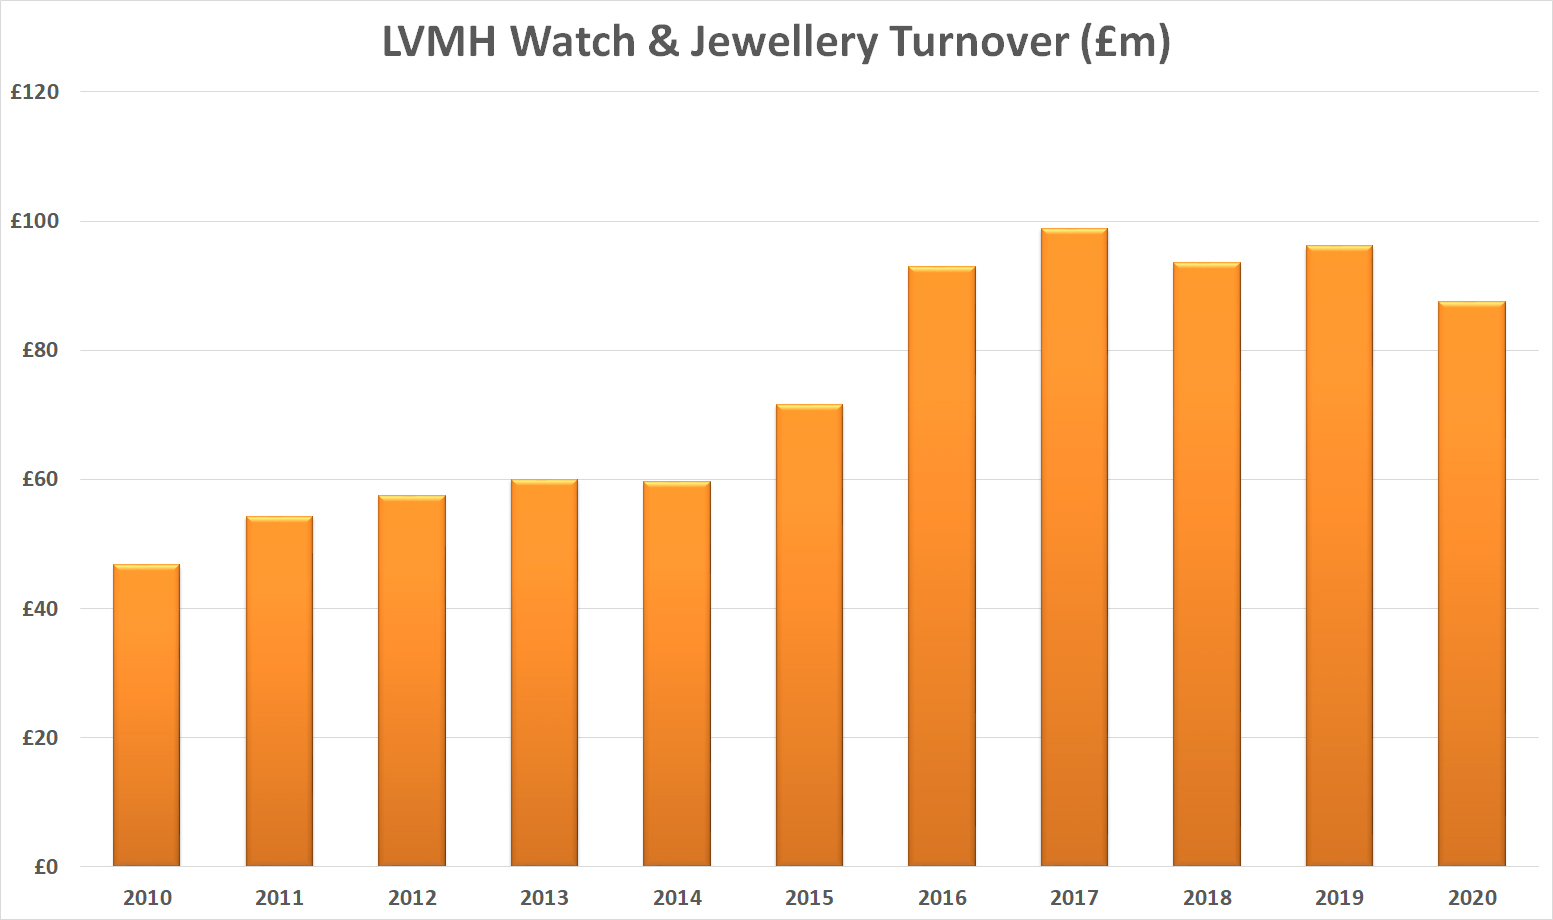 LVMH Reports Growth For Q1 2019, Including the Watches & Jewelry